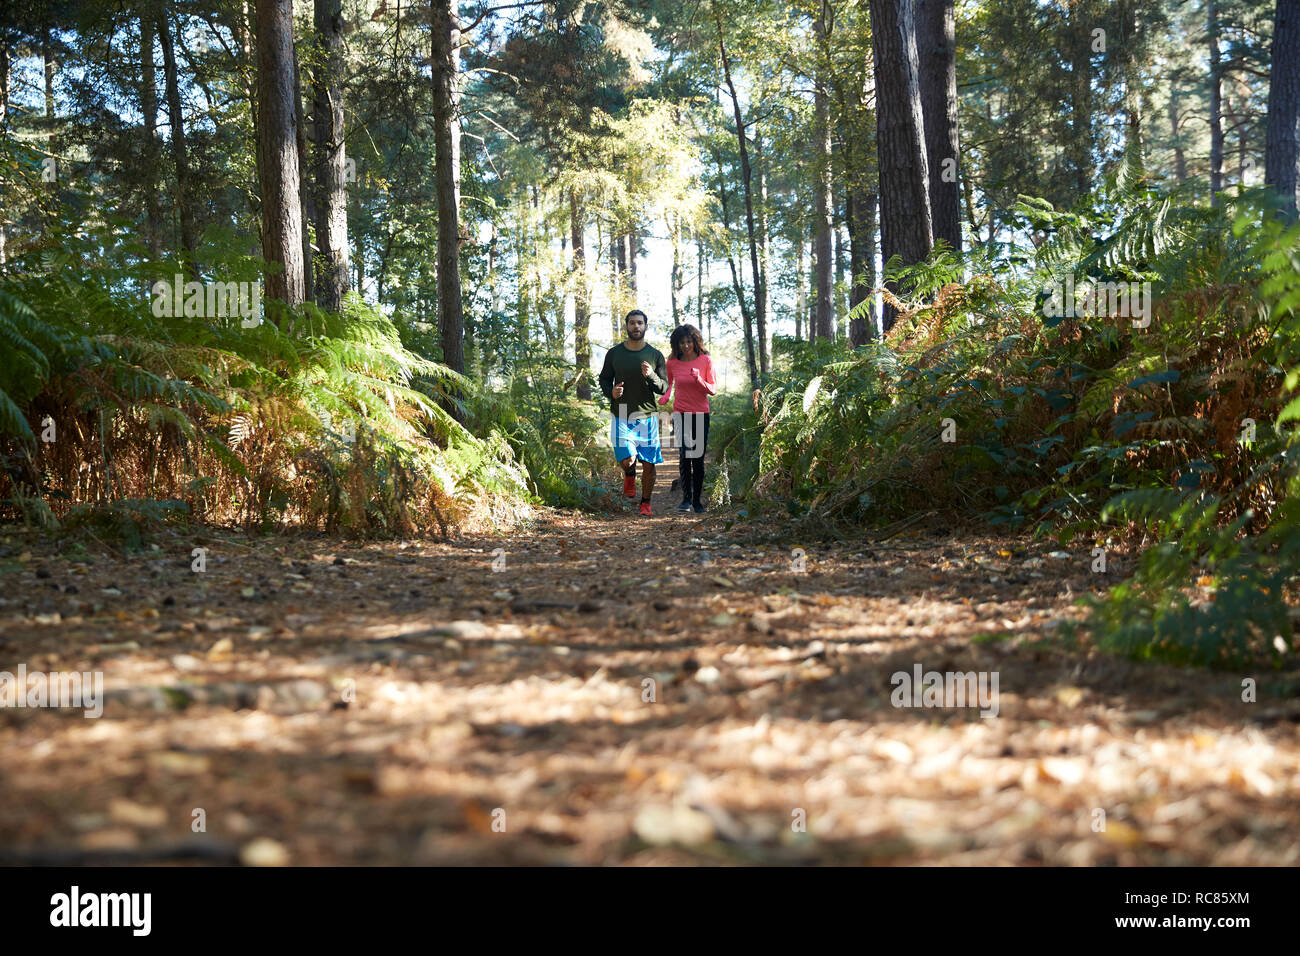 Male and female runners running in forest Stock Photo